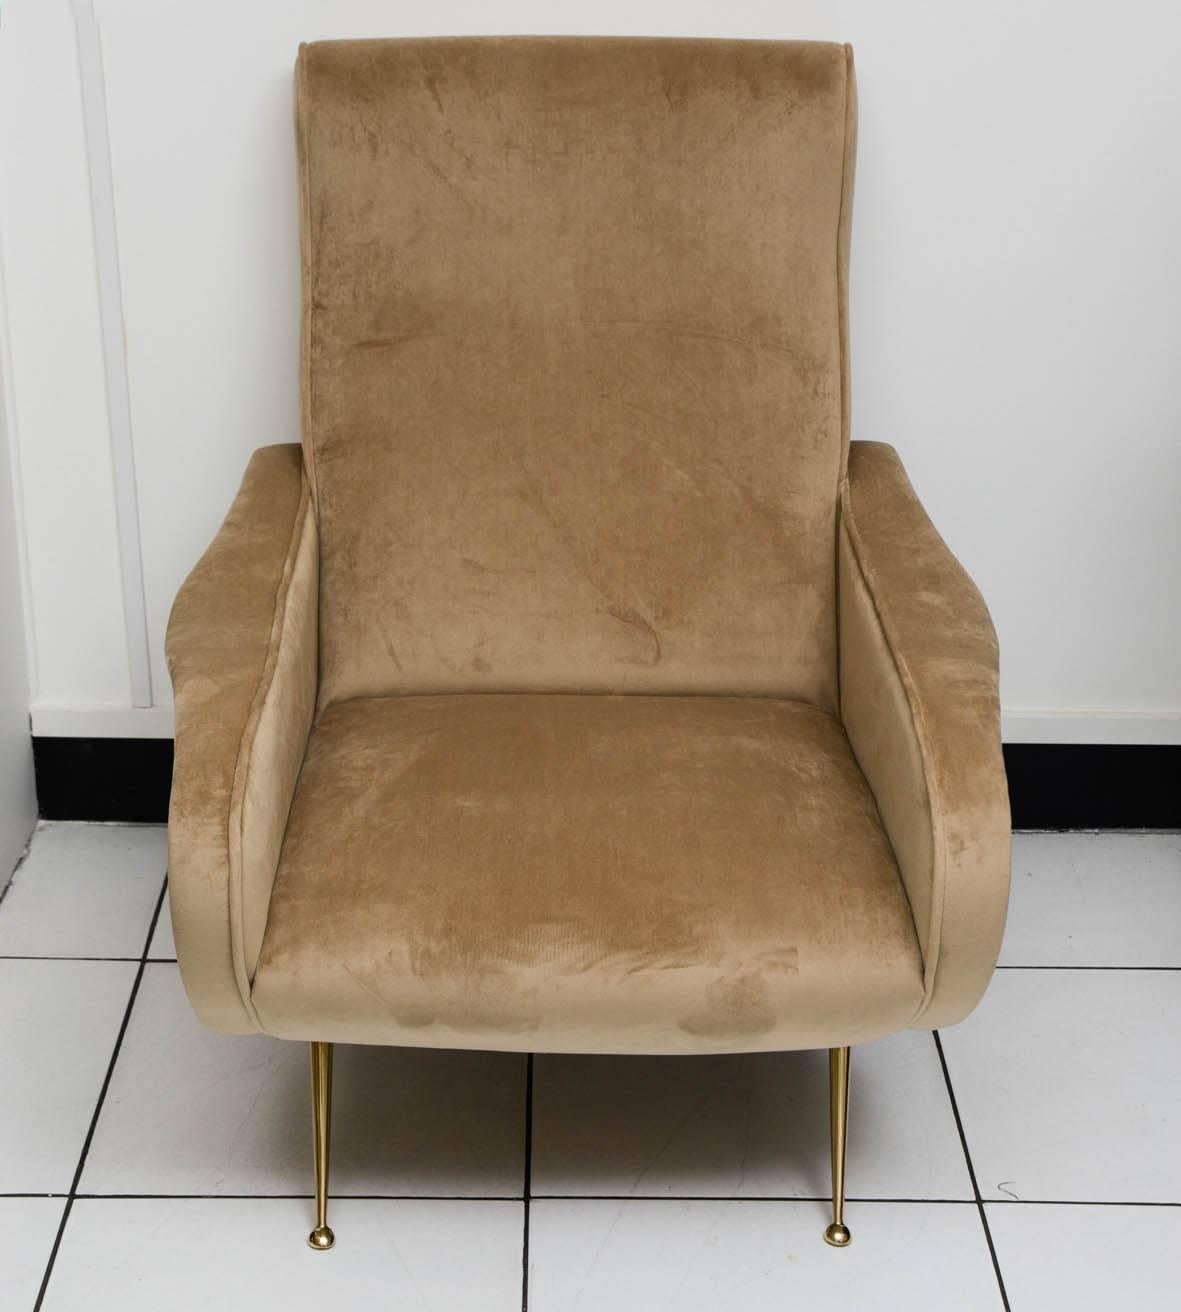 Italian armchairs reupholstered light brown velvet, in excellent condition.